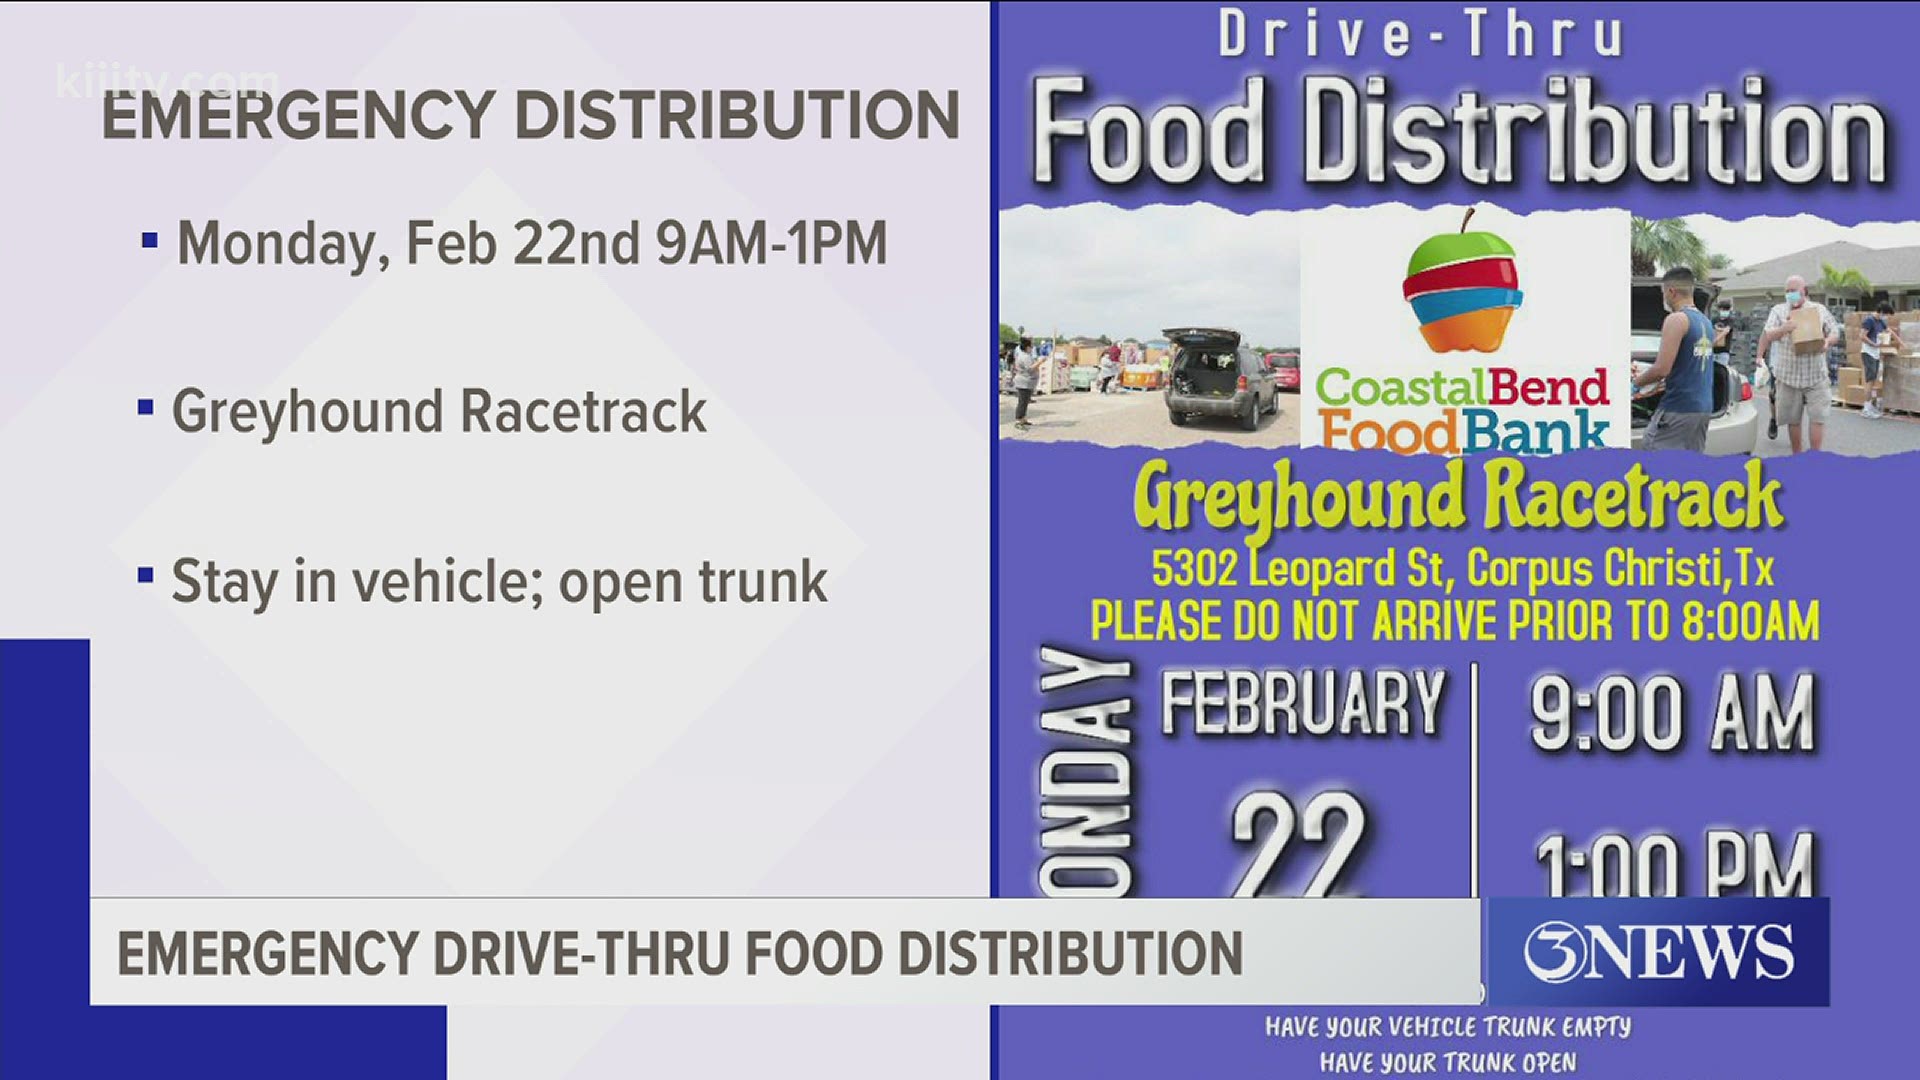 The drive thru will be from 9:00 a.m. to 1:00 p.m.